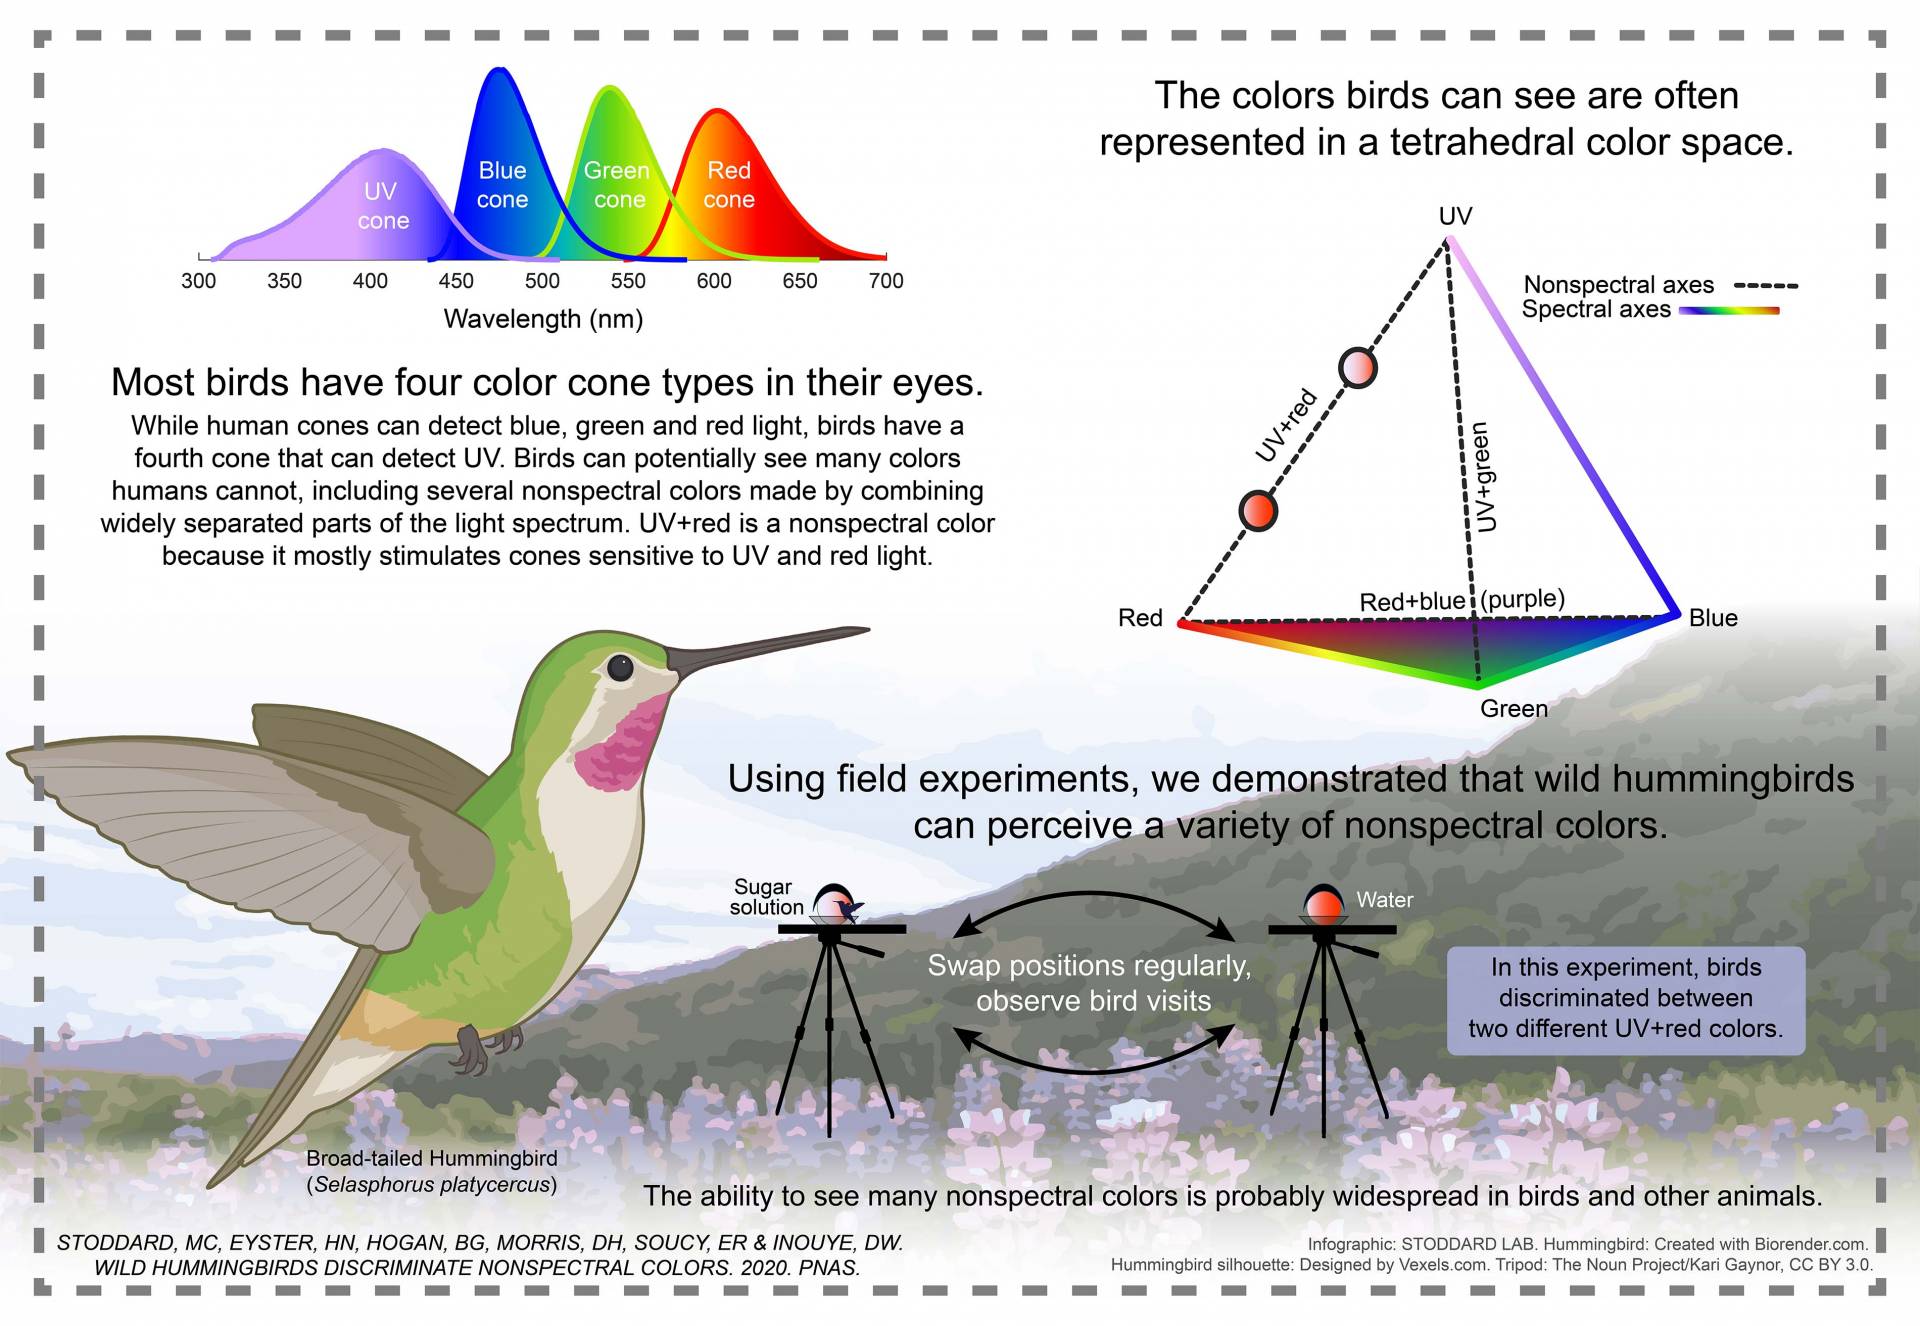 Most birds have 4 color cone types in their eyes. While human cones can detect blue, green, and red light, birds have a fourth cone that can detect UV. Birds can potentially see many colors humans cannot, including several nonspectral colors made by combining widely separated parts of the light spectrum. UV+red is a nonspectral color because it mostly stimulates cones sensitive to UV and red light. Using field experiments, we demonstrated that wild hummingbirds can perceive a variety of nonspectral colors.